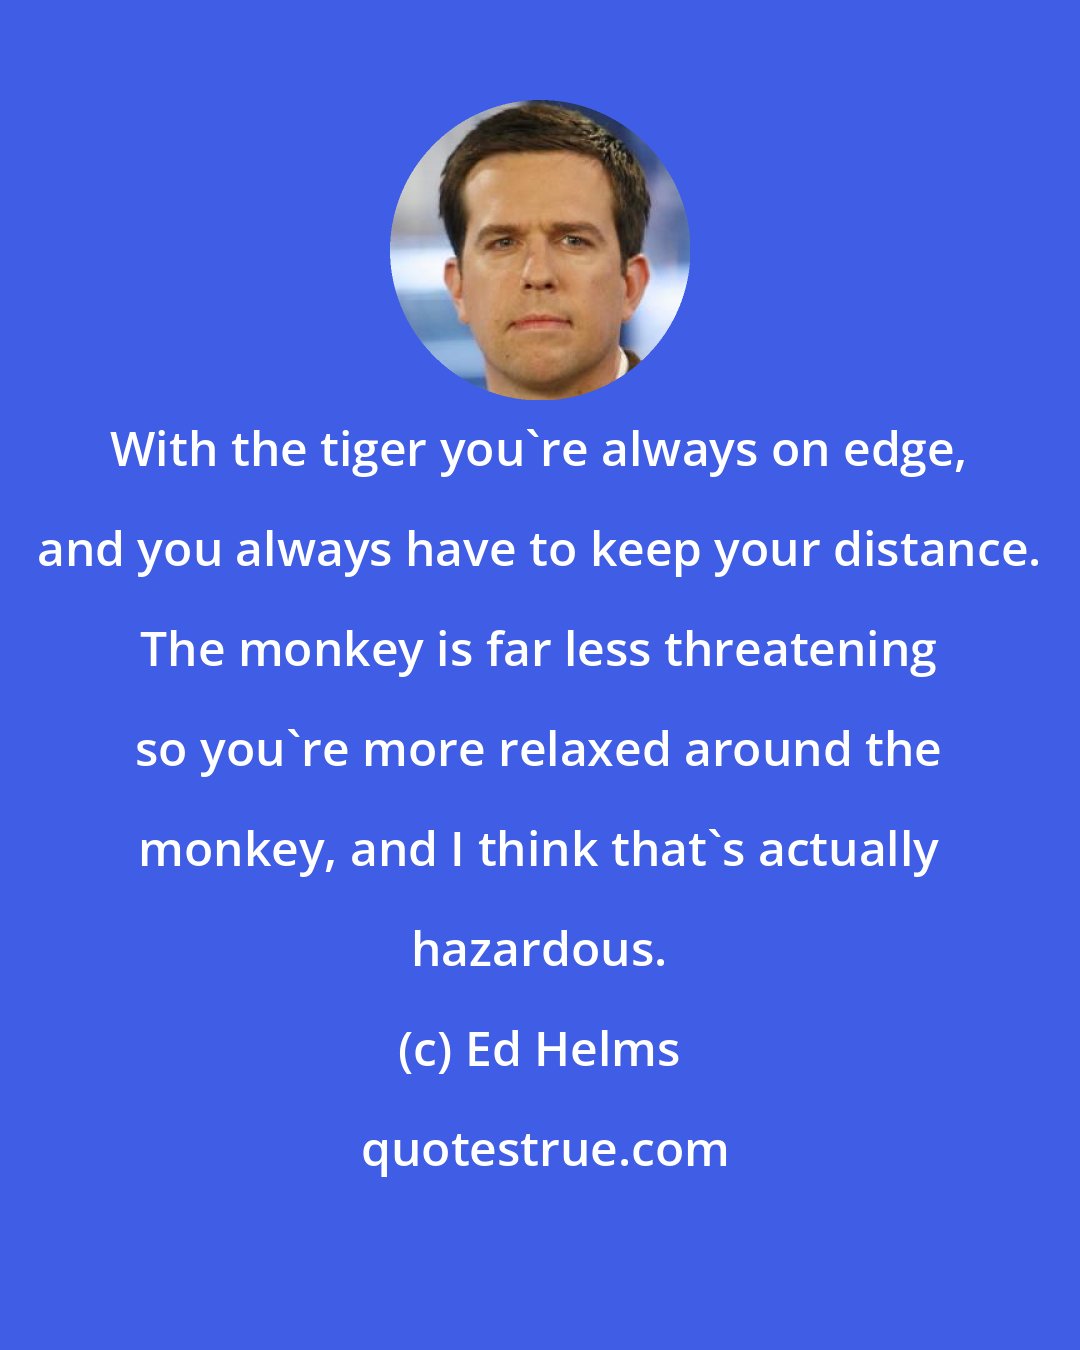 Ed Helms: With the tiger you're always on edge, and you always have to keep your distance. The monkey is far less threatening so you're more relaxed around the monkey, and I think that's actually hazardous.